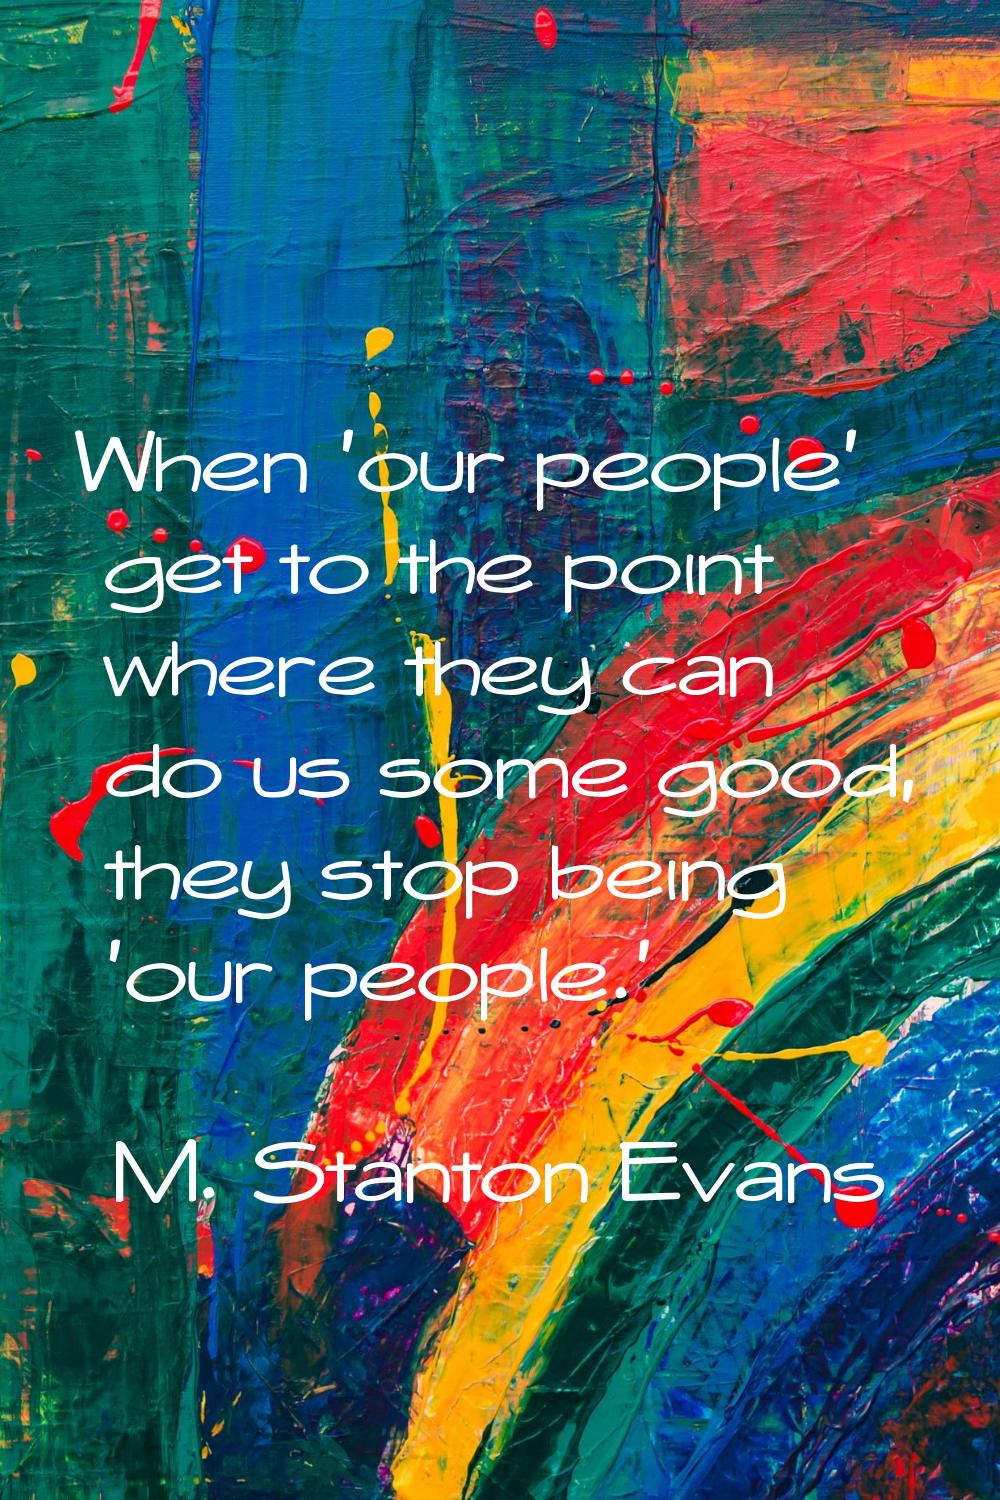 When 'our people' get to the point where they can do us some good, they stop being 'our people.'